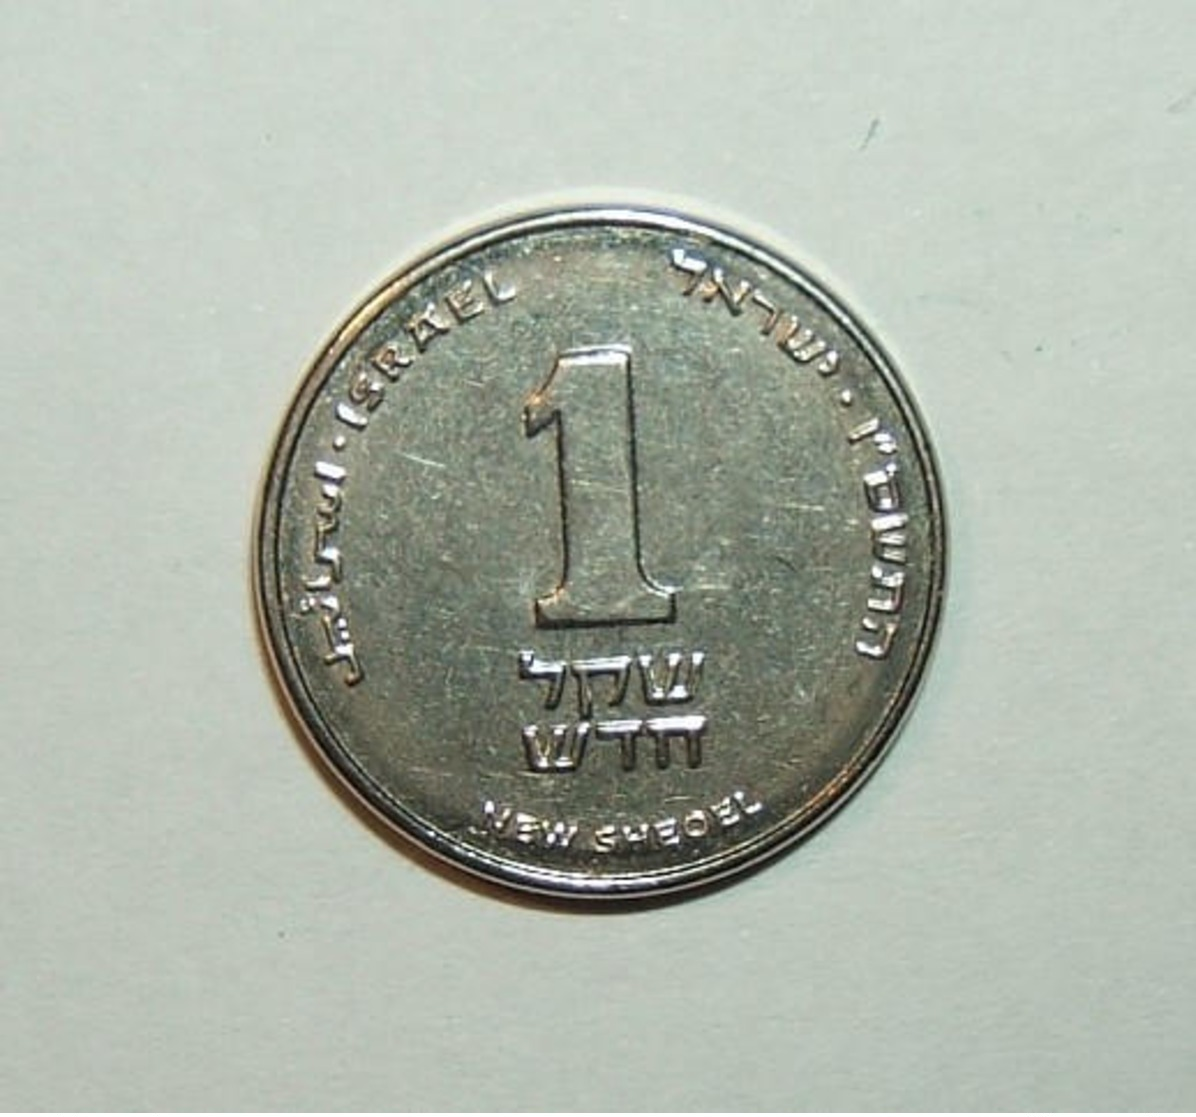 Israeli Forged(?) 1 Shekel Coin W/thin Crooked Lettering & Poor Detail, 4.1g - Israel